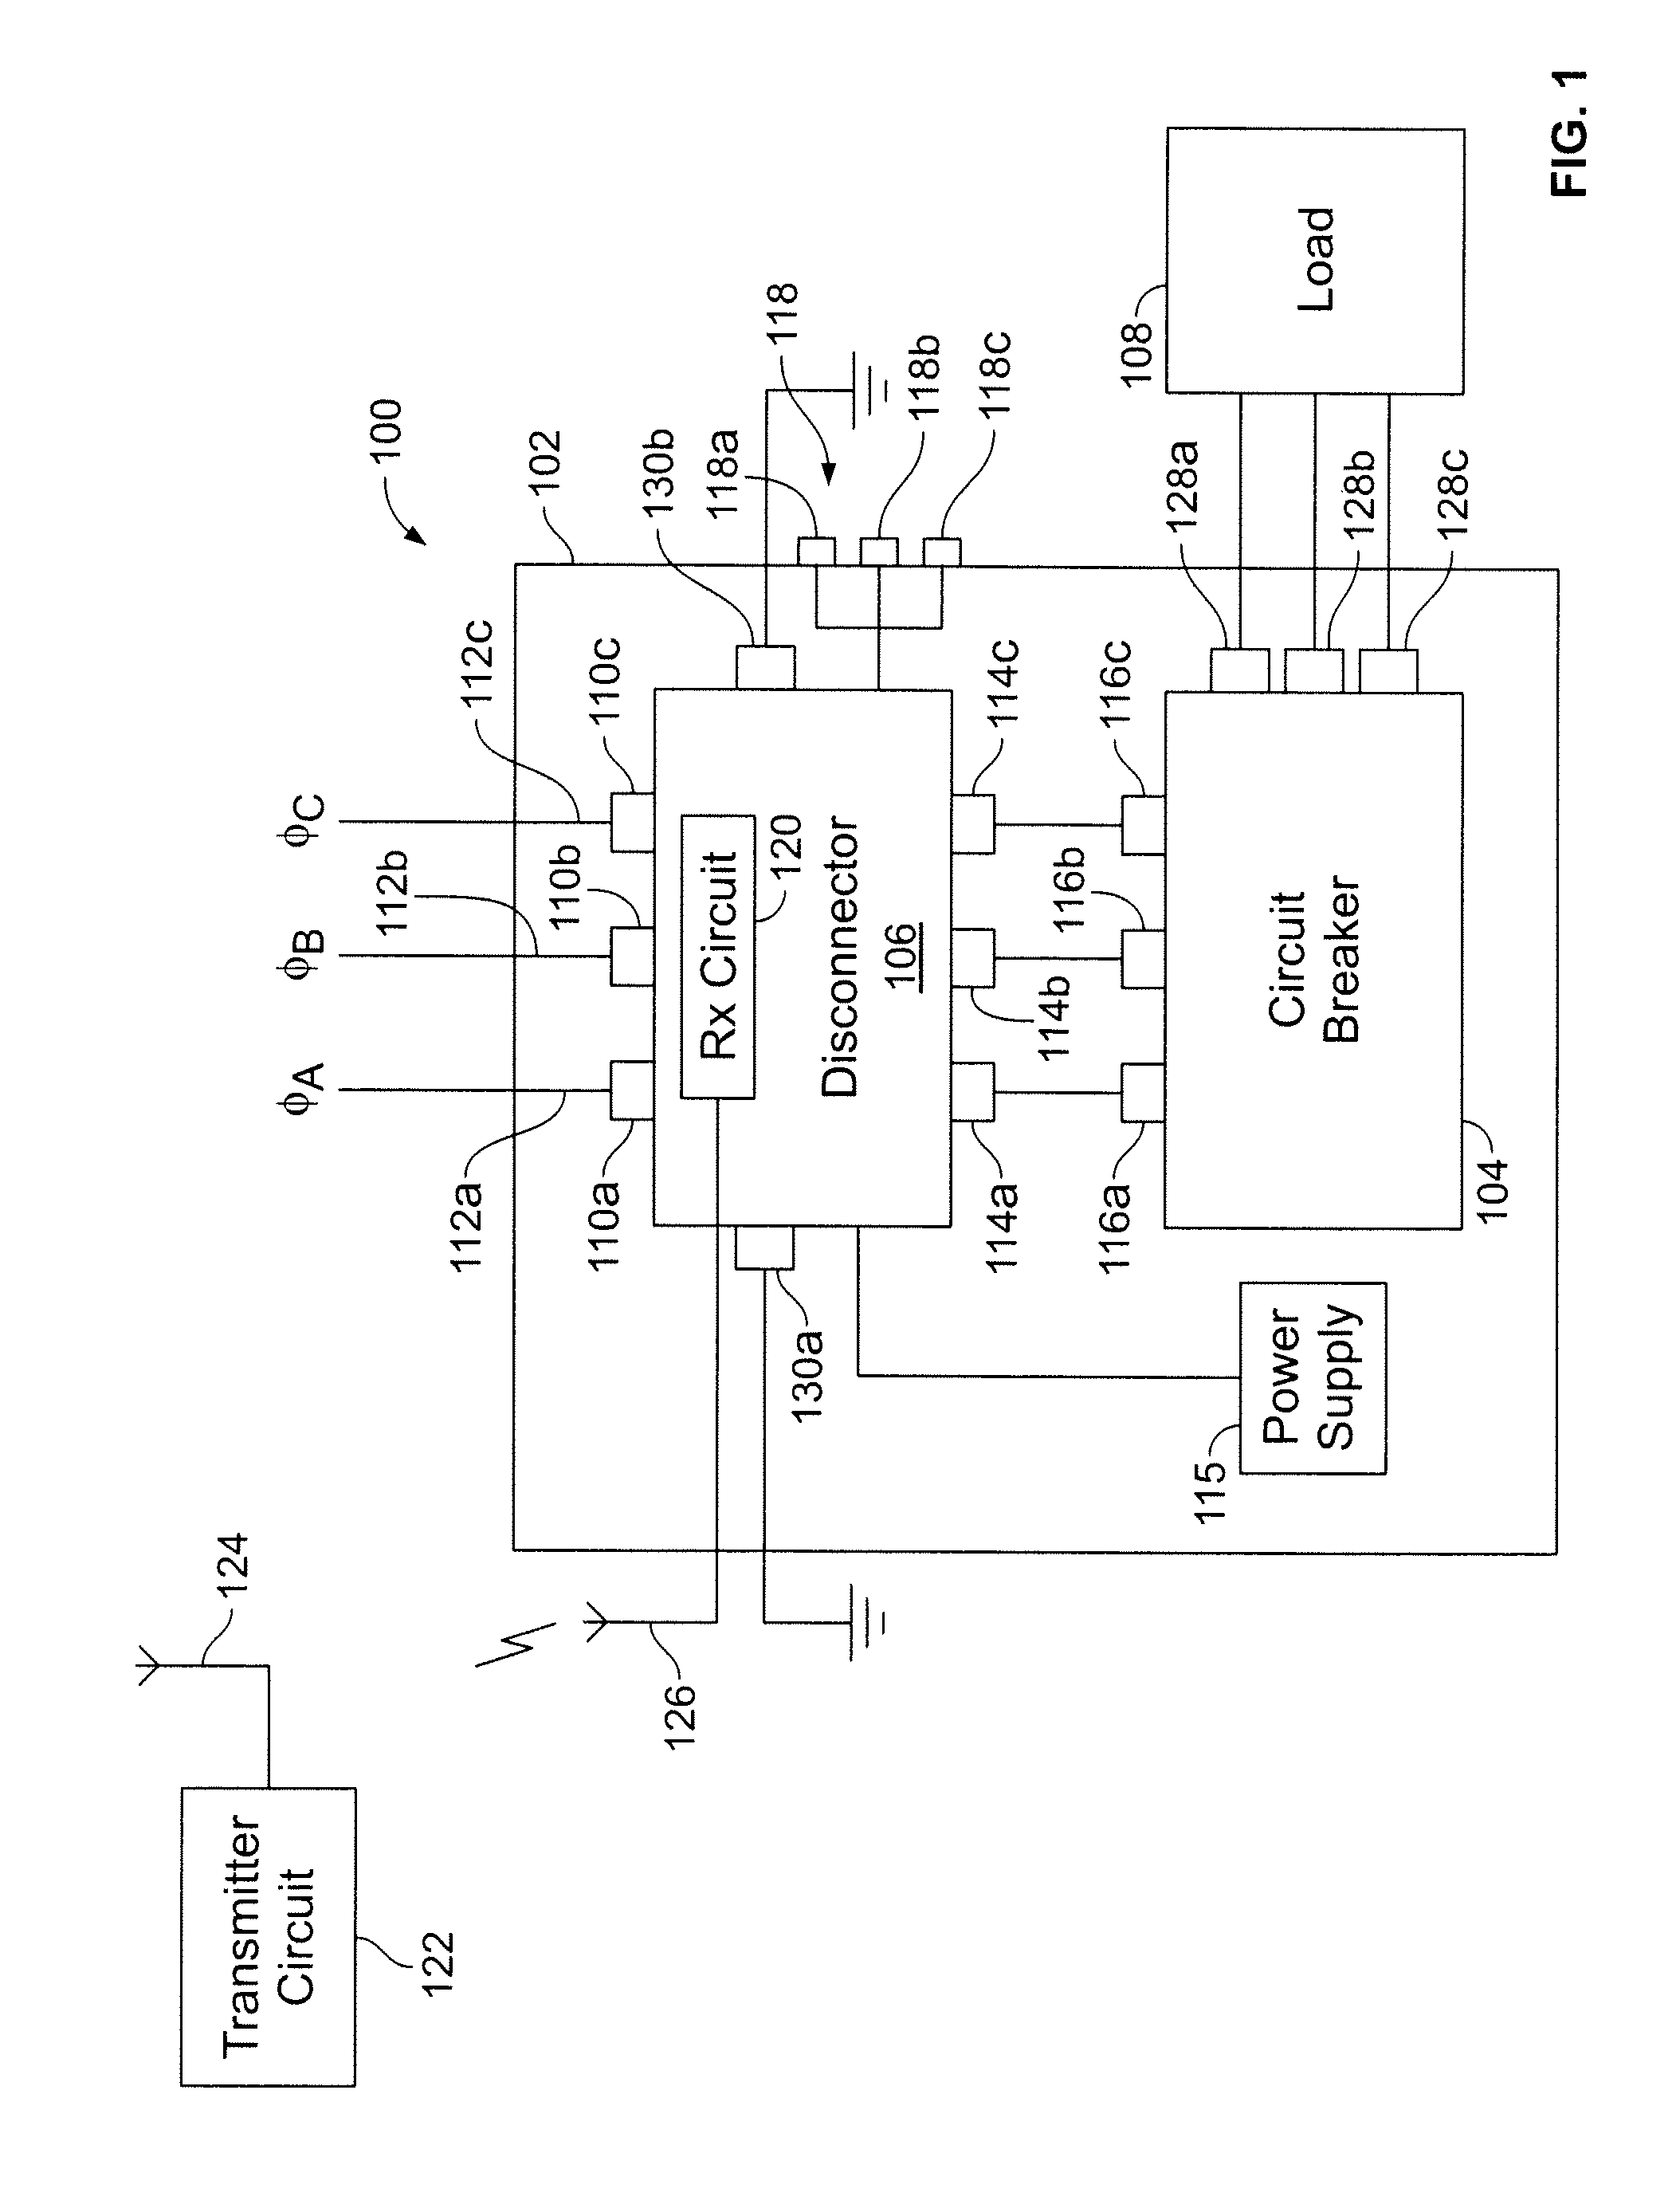 Remote drive for disconnector/isolator used in switchgear